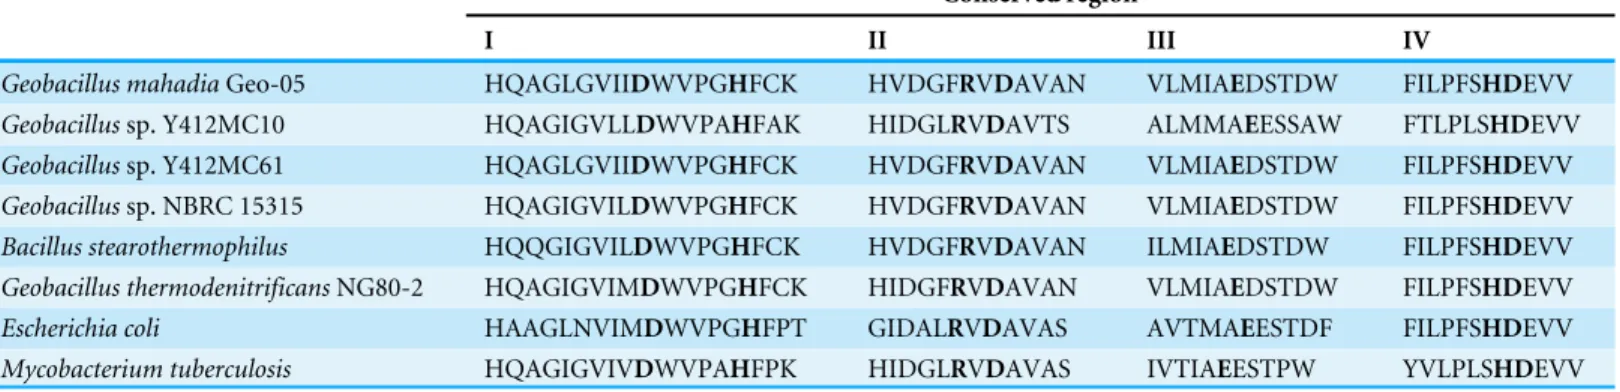 Table 1 Conserved regions in glycogen branching enzyme from Geobacillus spp., Escherichia coli and Mycobacterium tuberculosis.